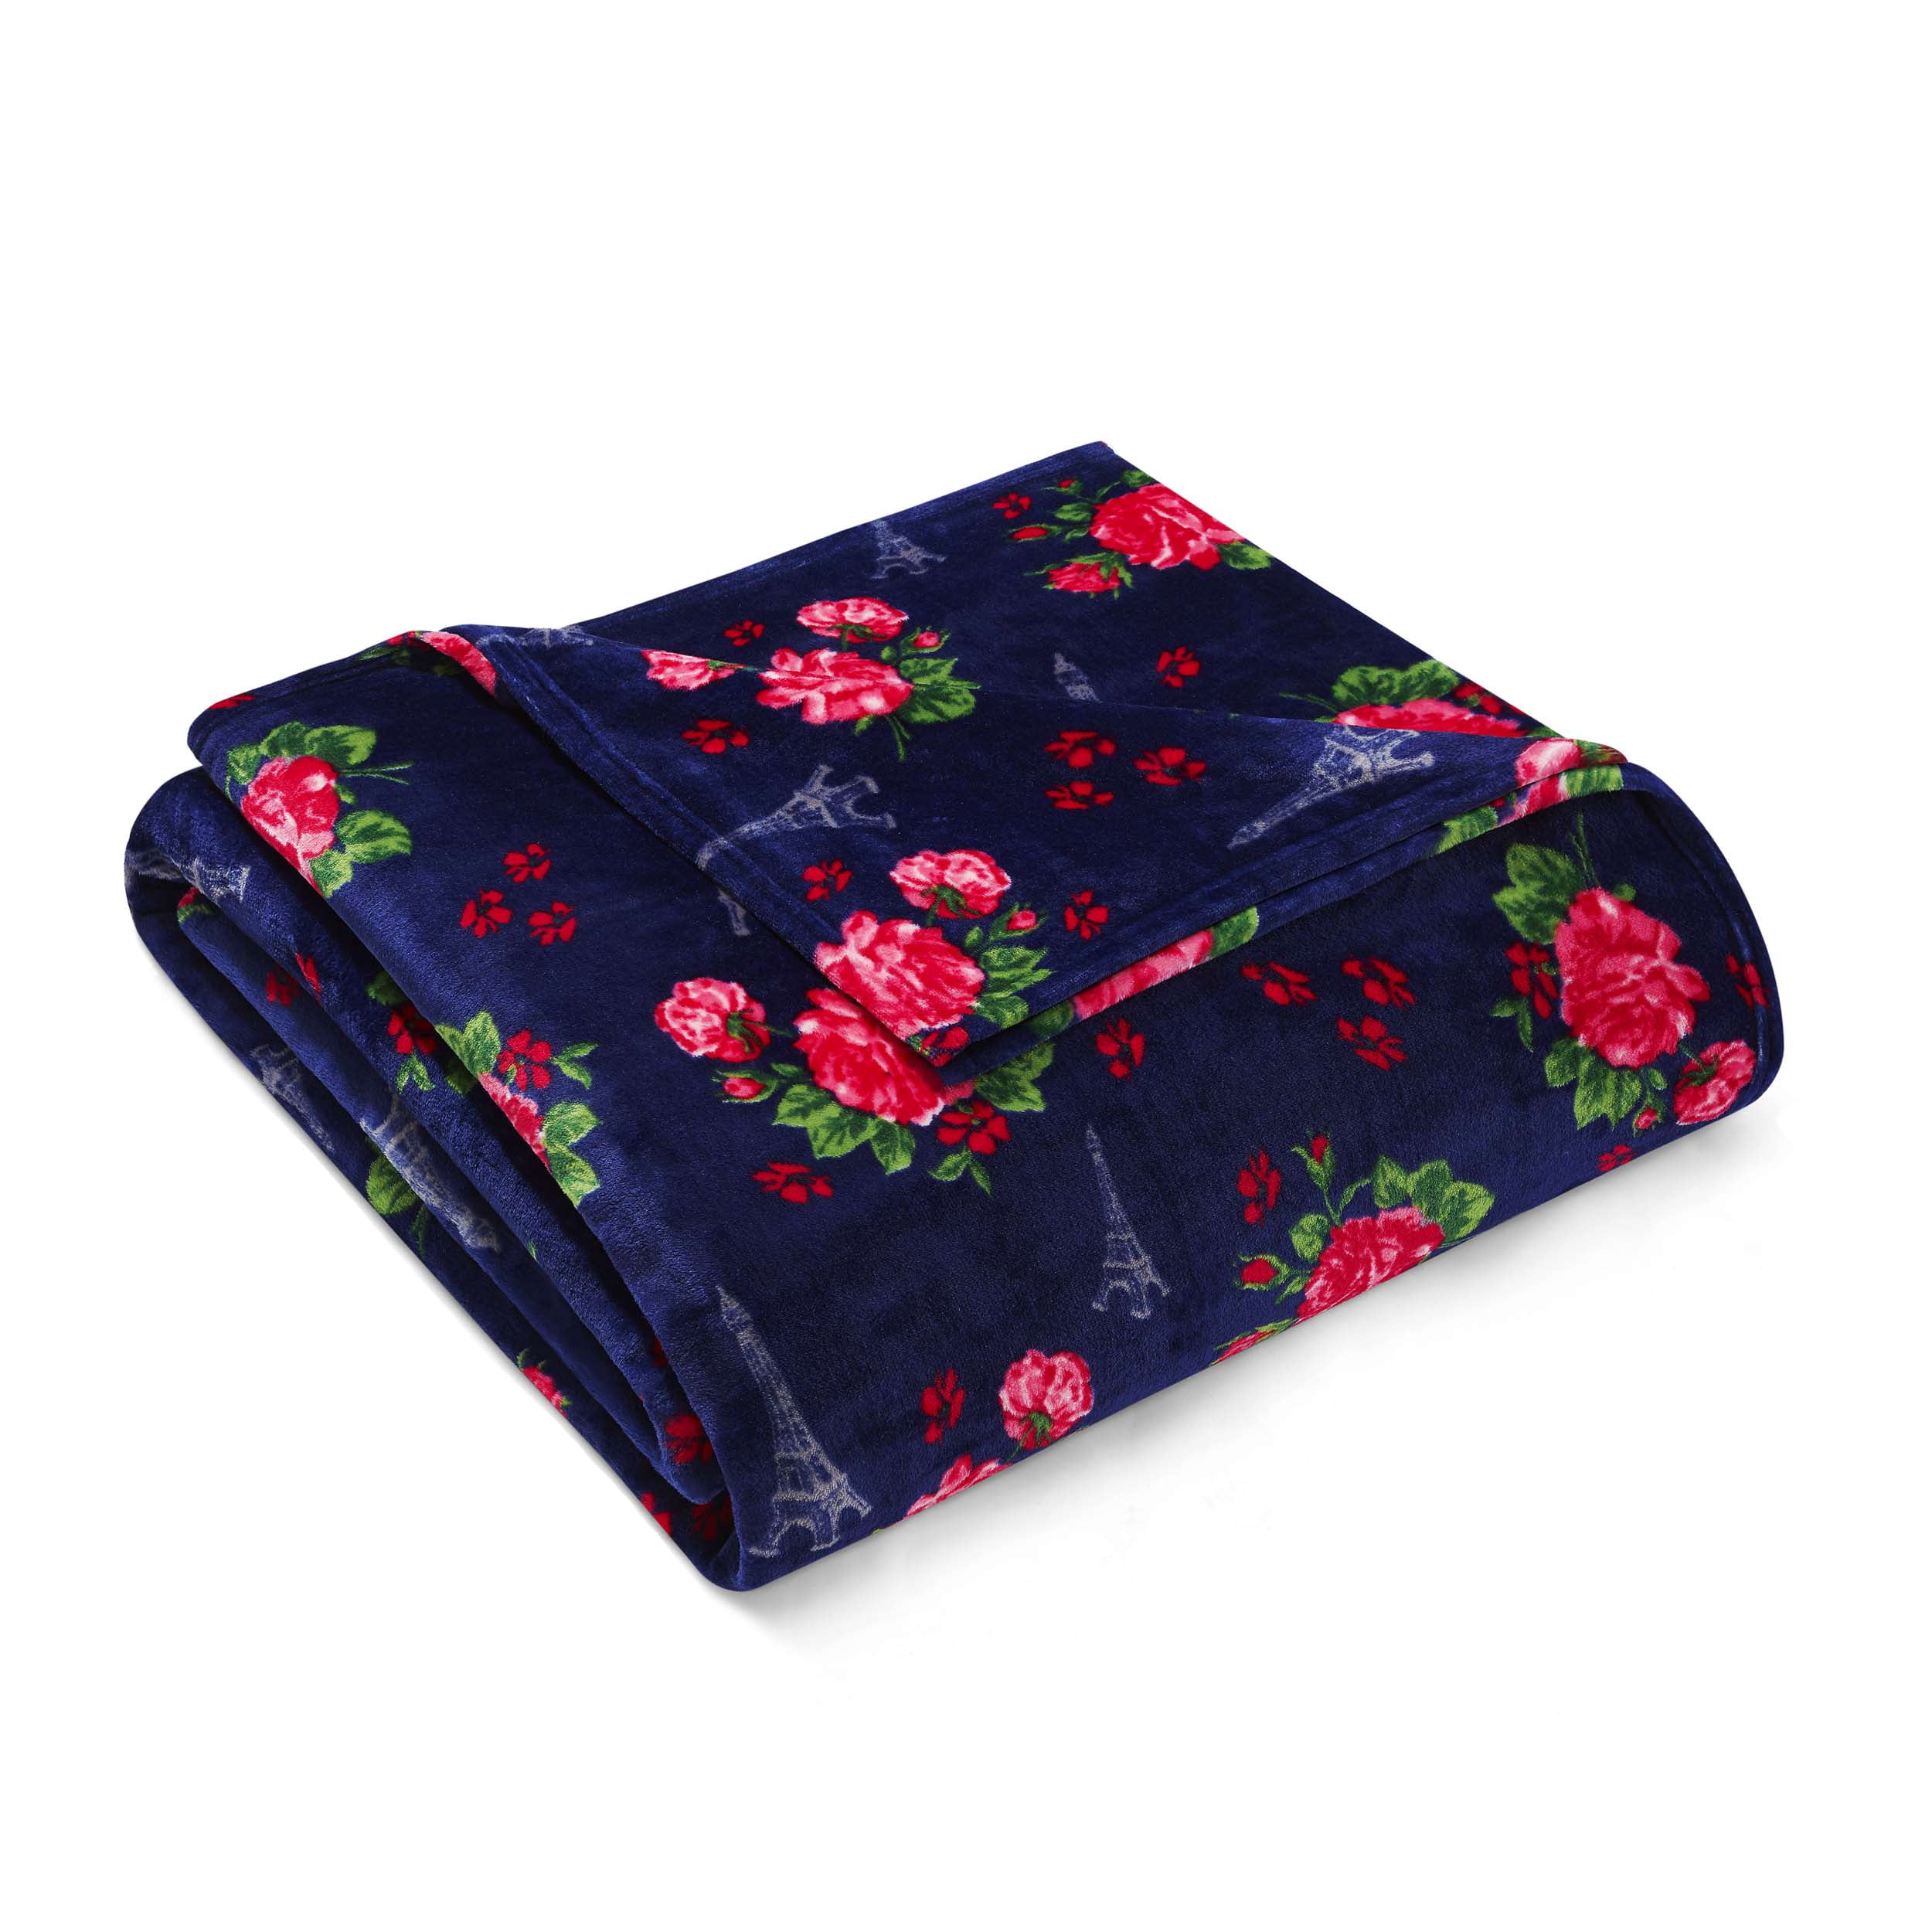 Betsey Johnson French,Floral Fleece Bed Blanket, Full,Queen, Blue ...